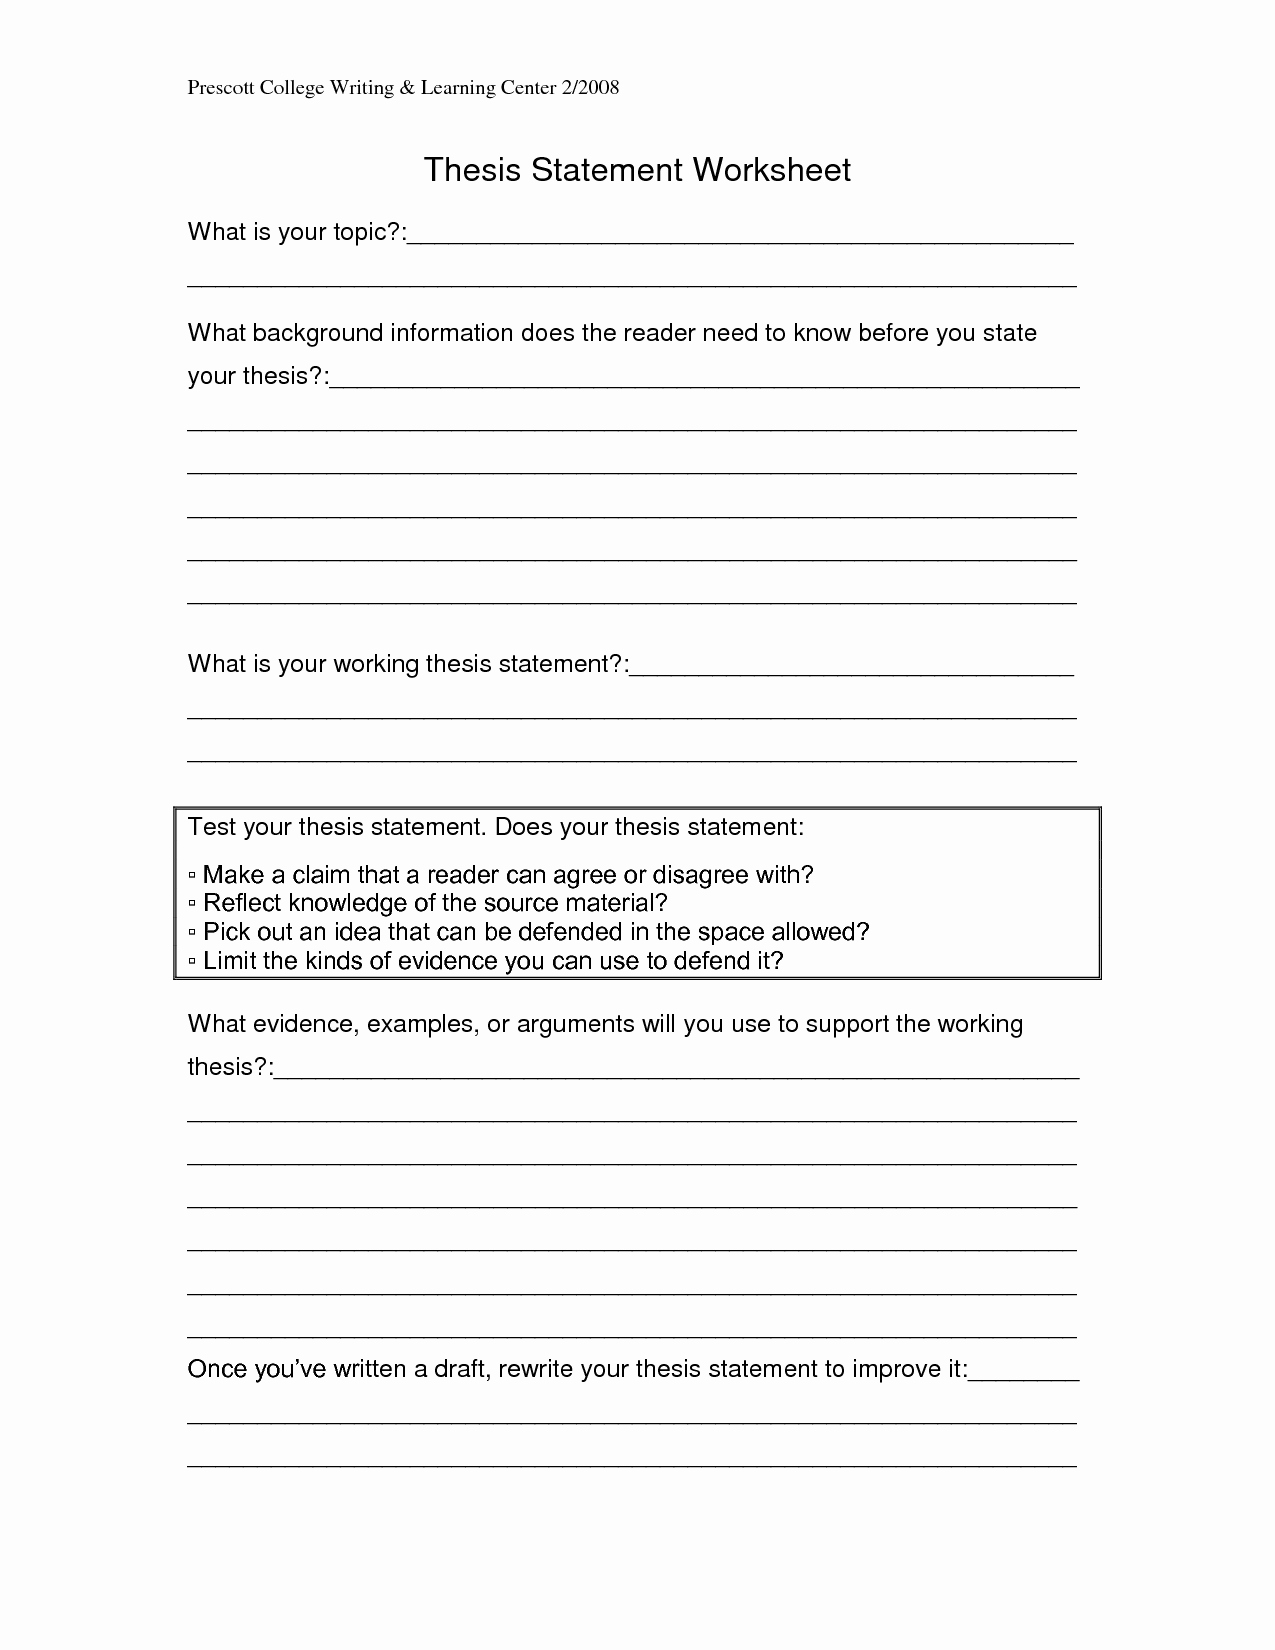 Writing A thesis Statement Worksheet Awesome 13 Best Of Writing sonnets Worksheet Sample Ode